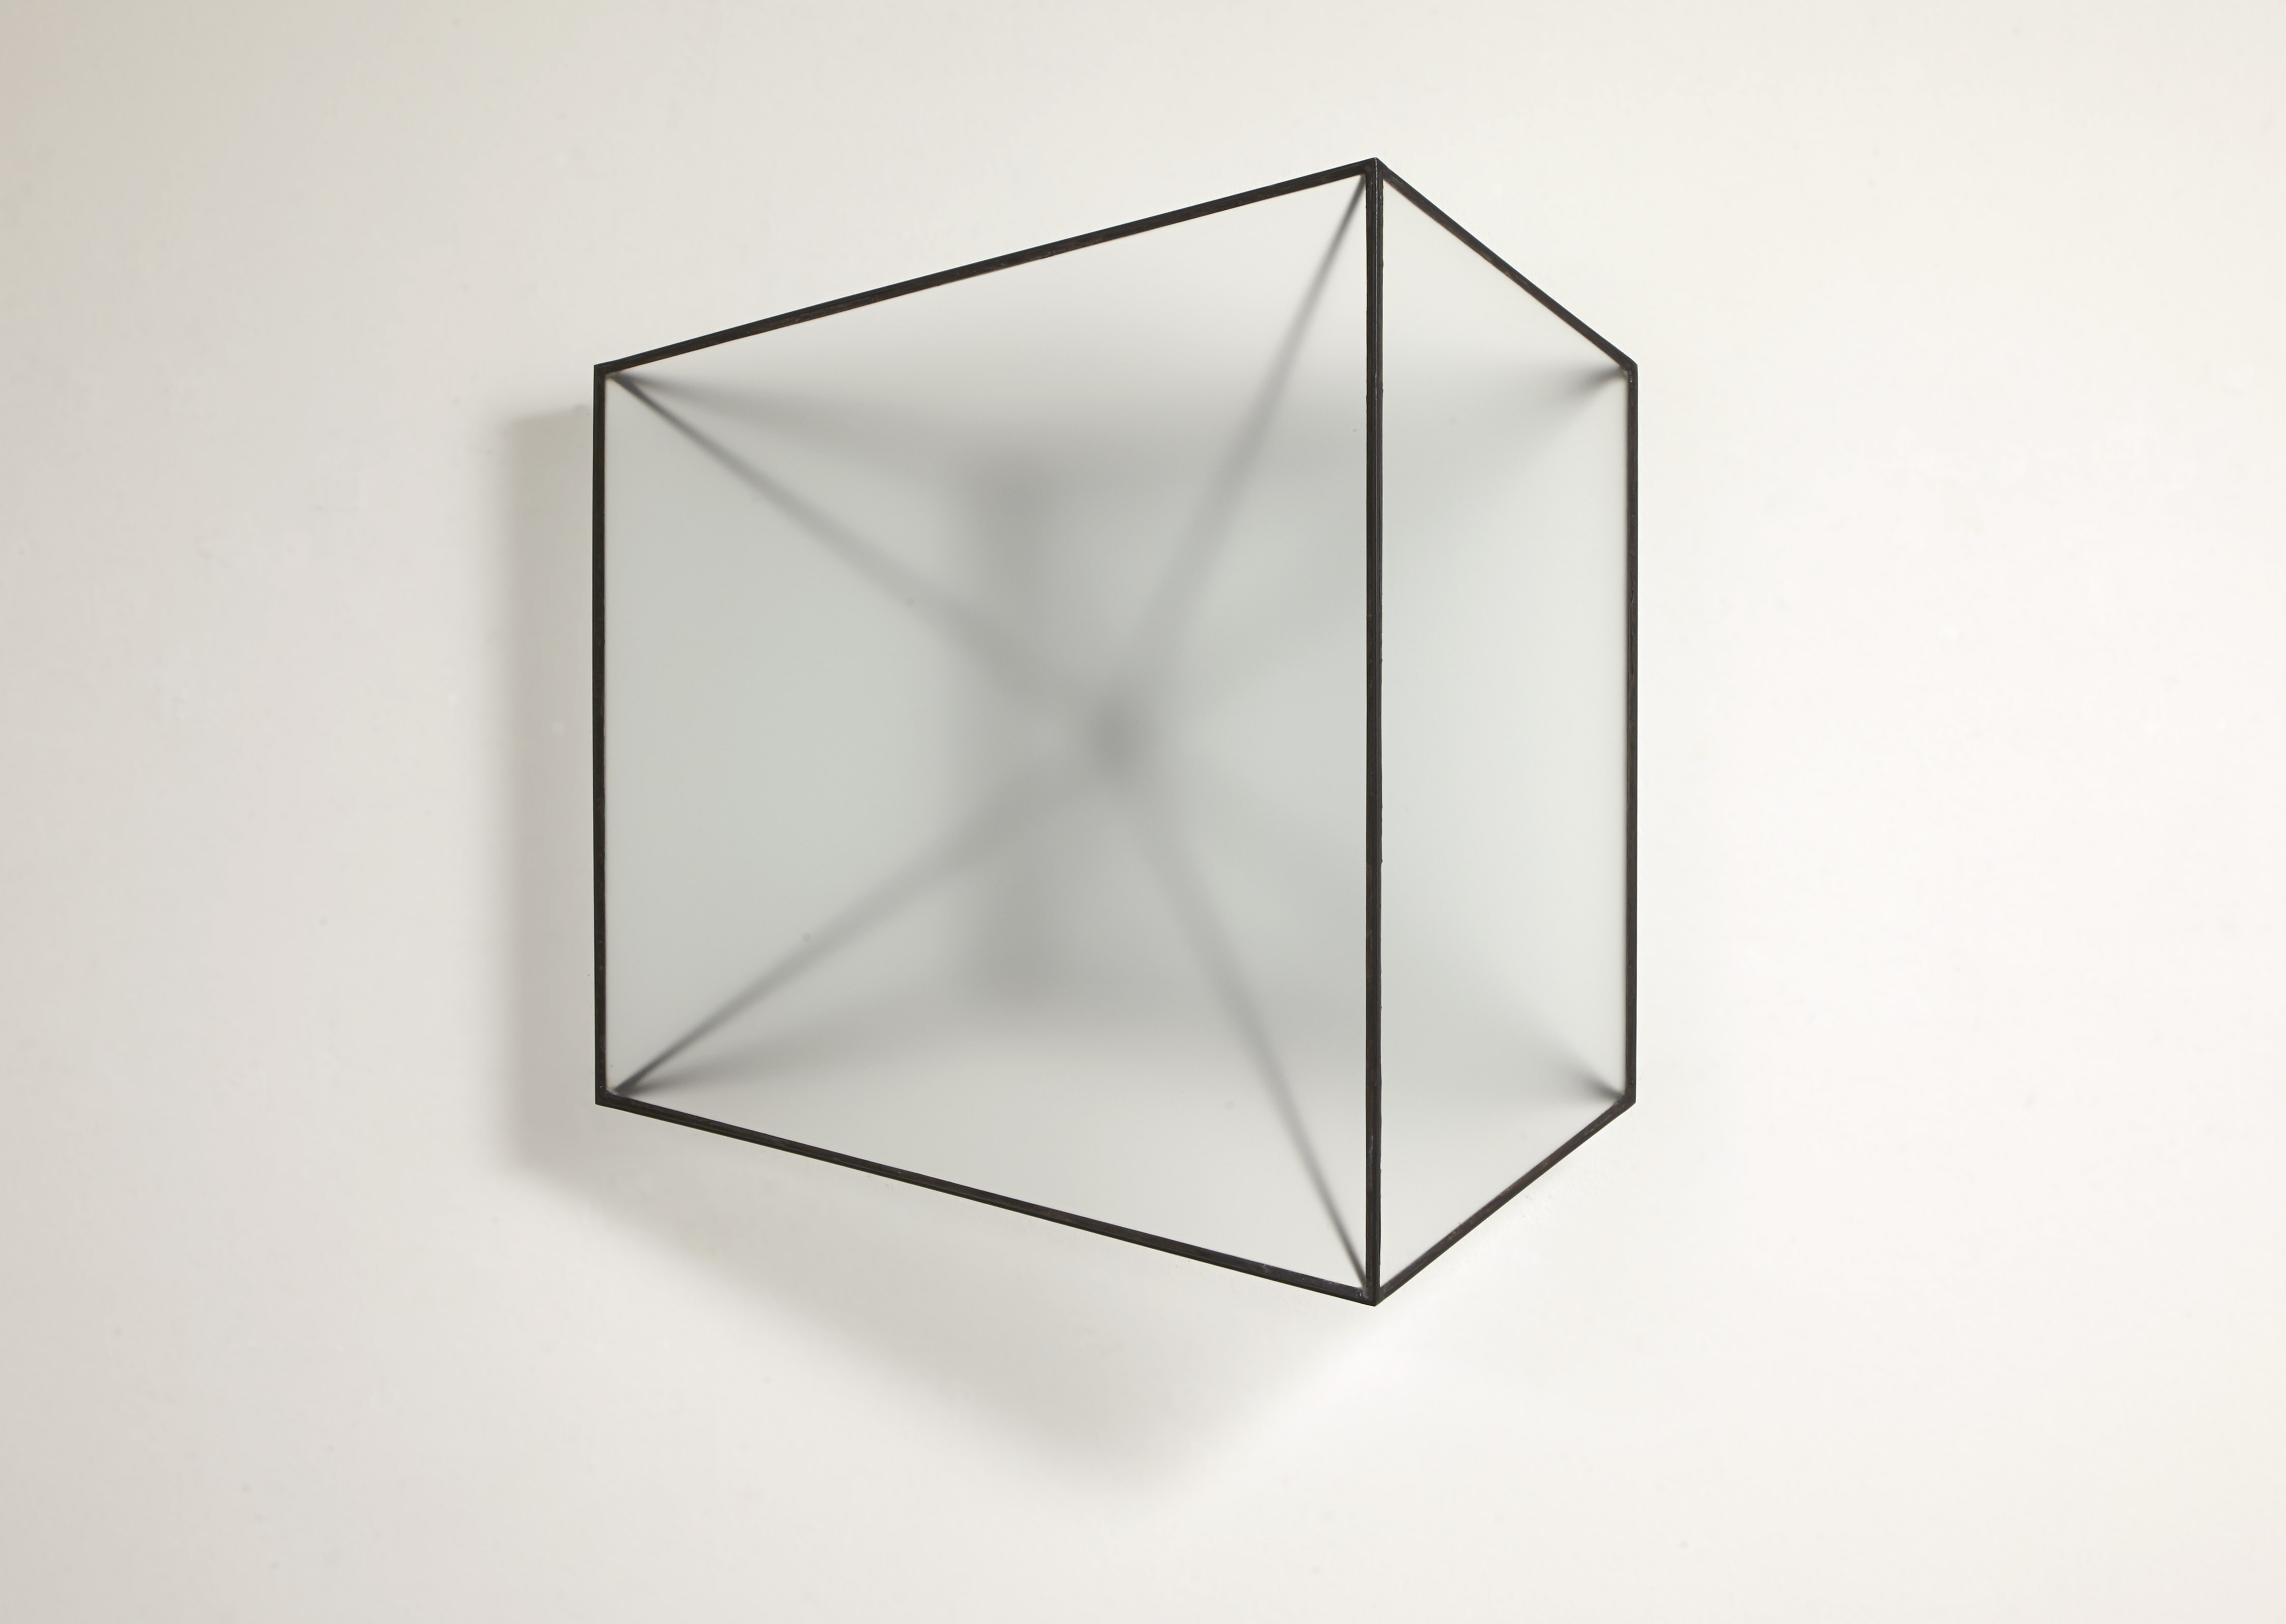 Reinoud Oudshoorn H-16 Frosted glass and iron Dimensions variable 2016